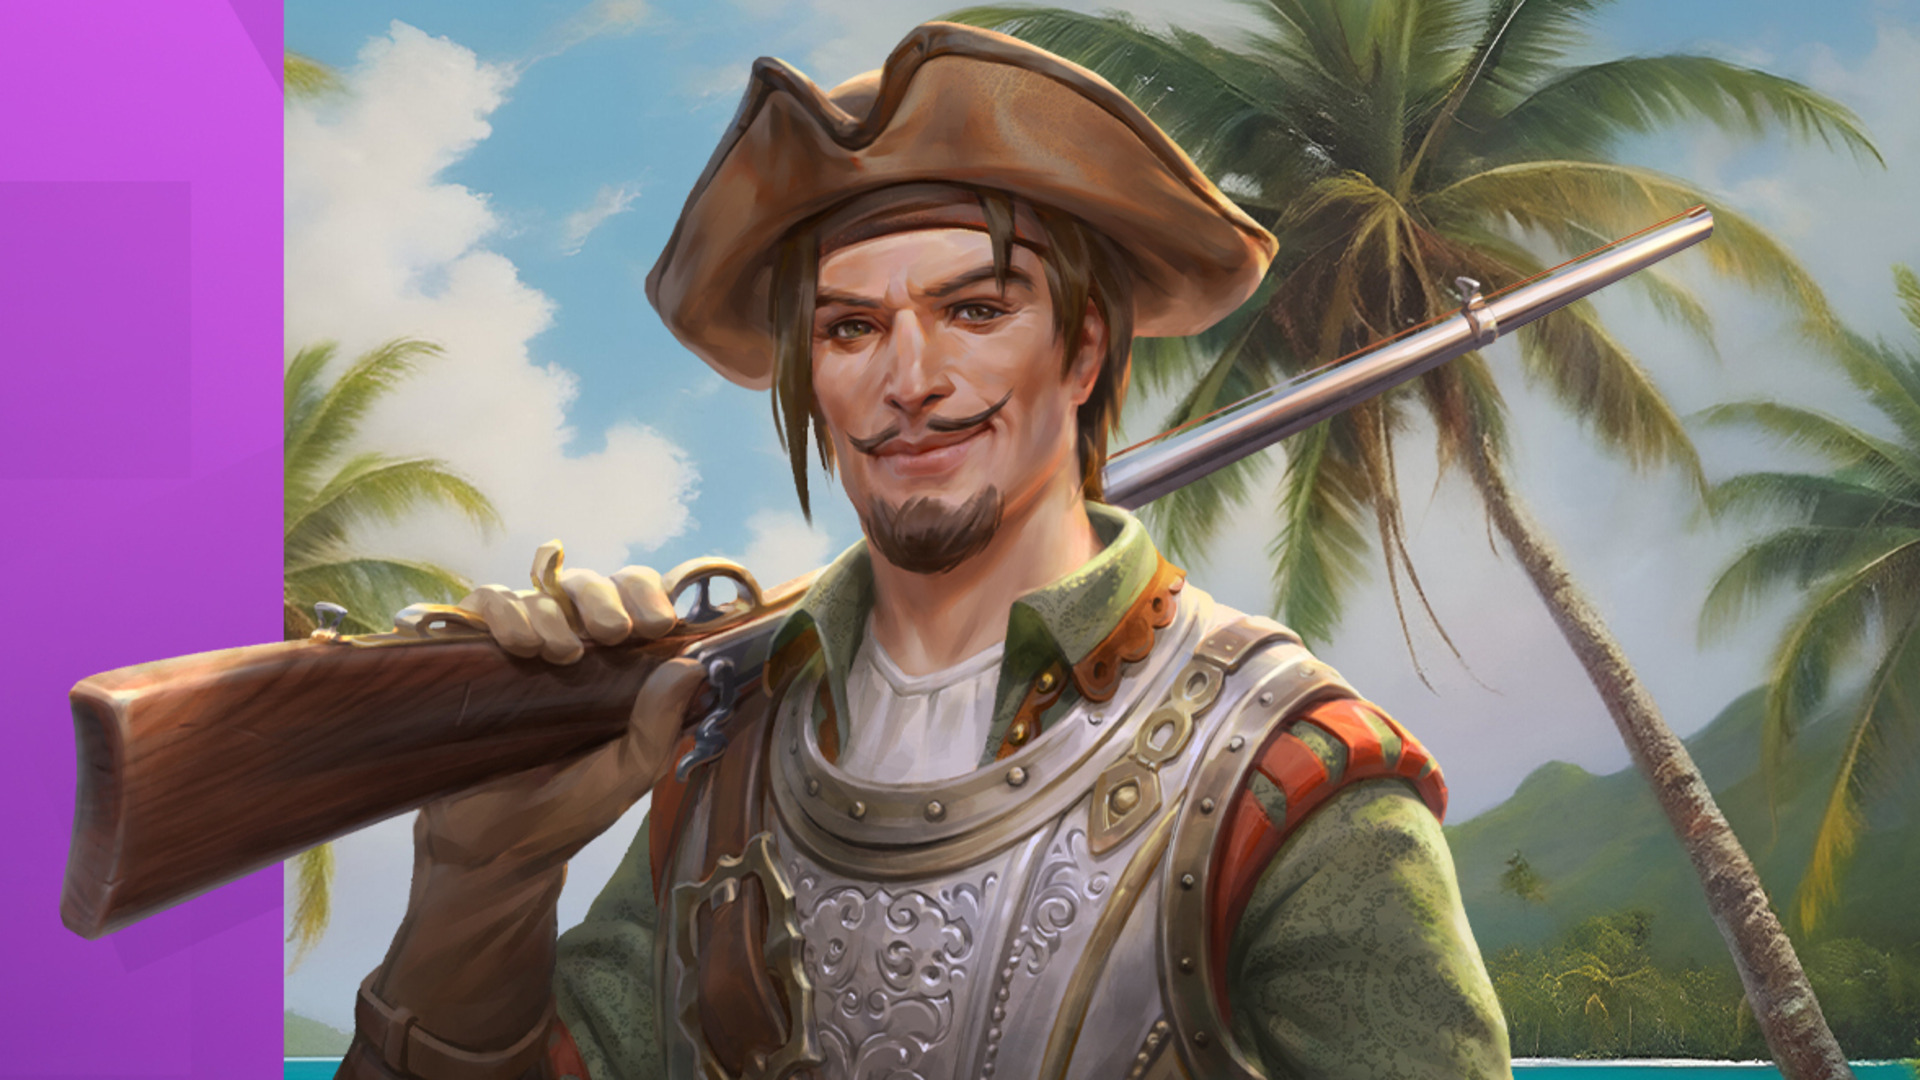 A 23 year-old cult classic pirate series has been revived as a free open-world RPG inspired by the best pirate game ever, and it’s getting great Steam reviews